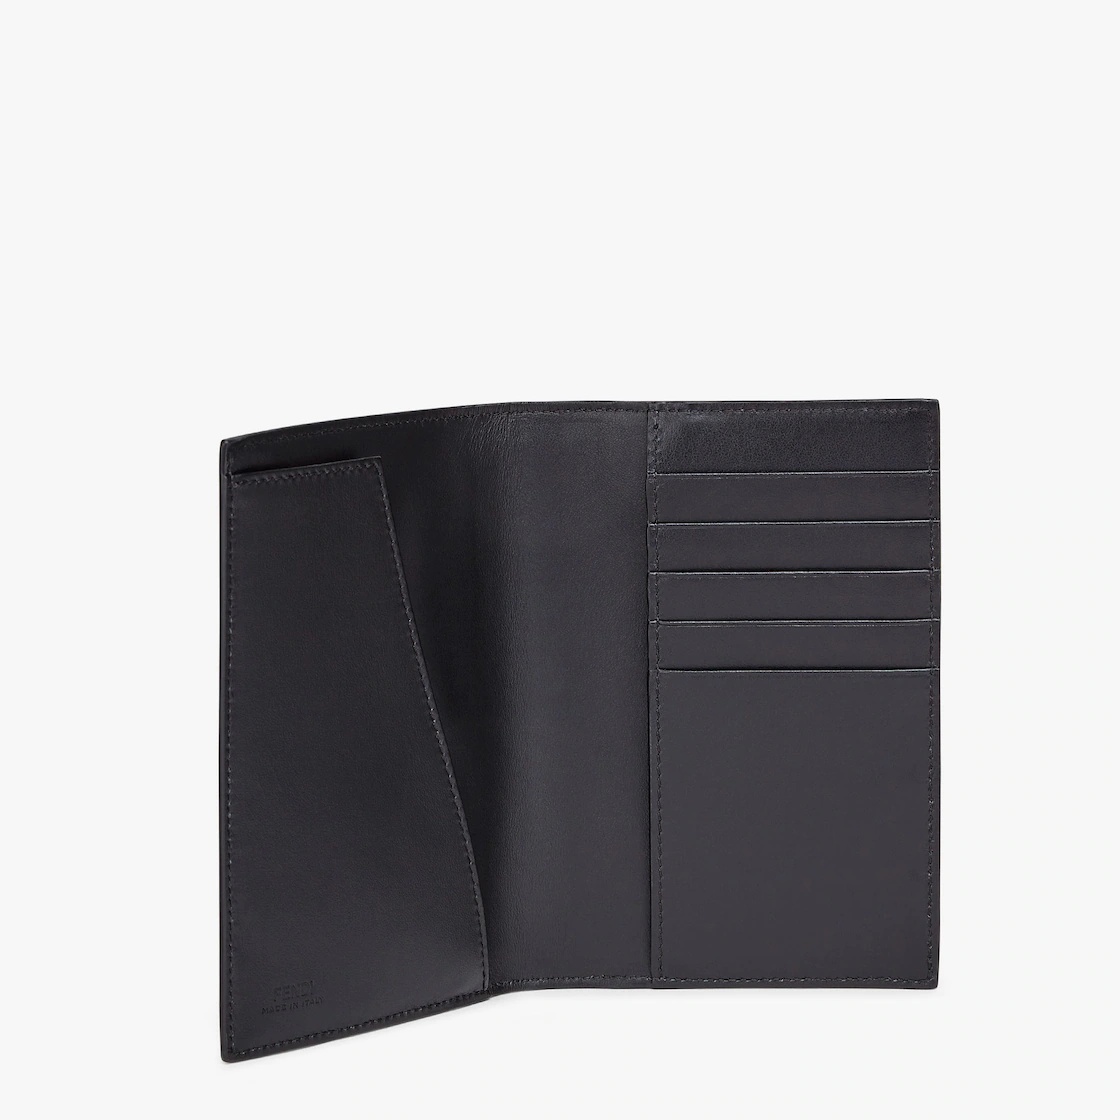 Passport cover or document holder with interior organized in five card slots. Made of gray textured  - 3